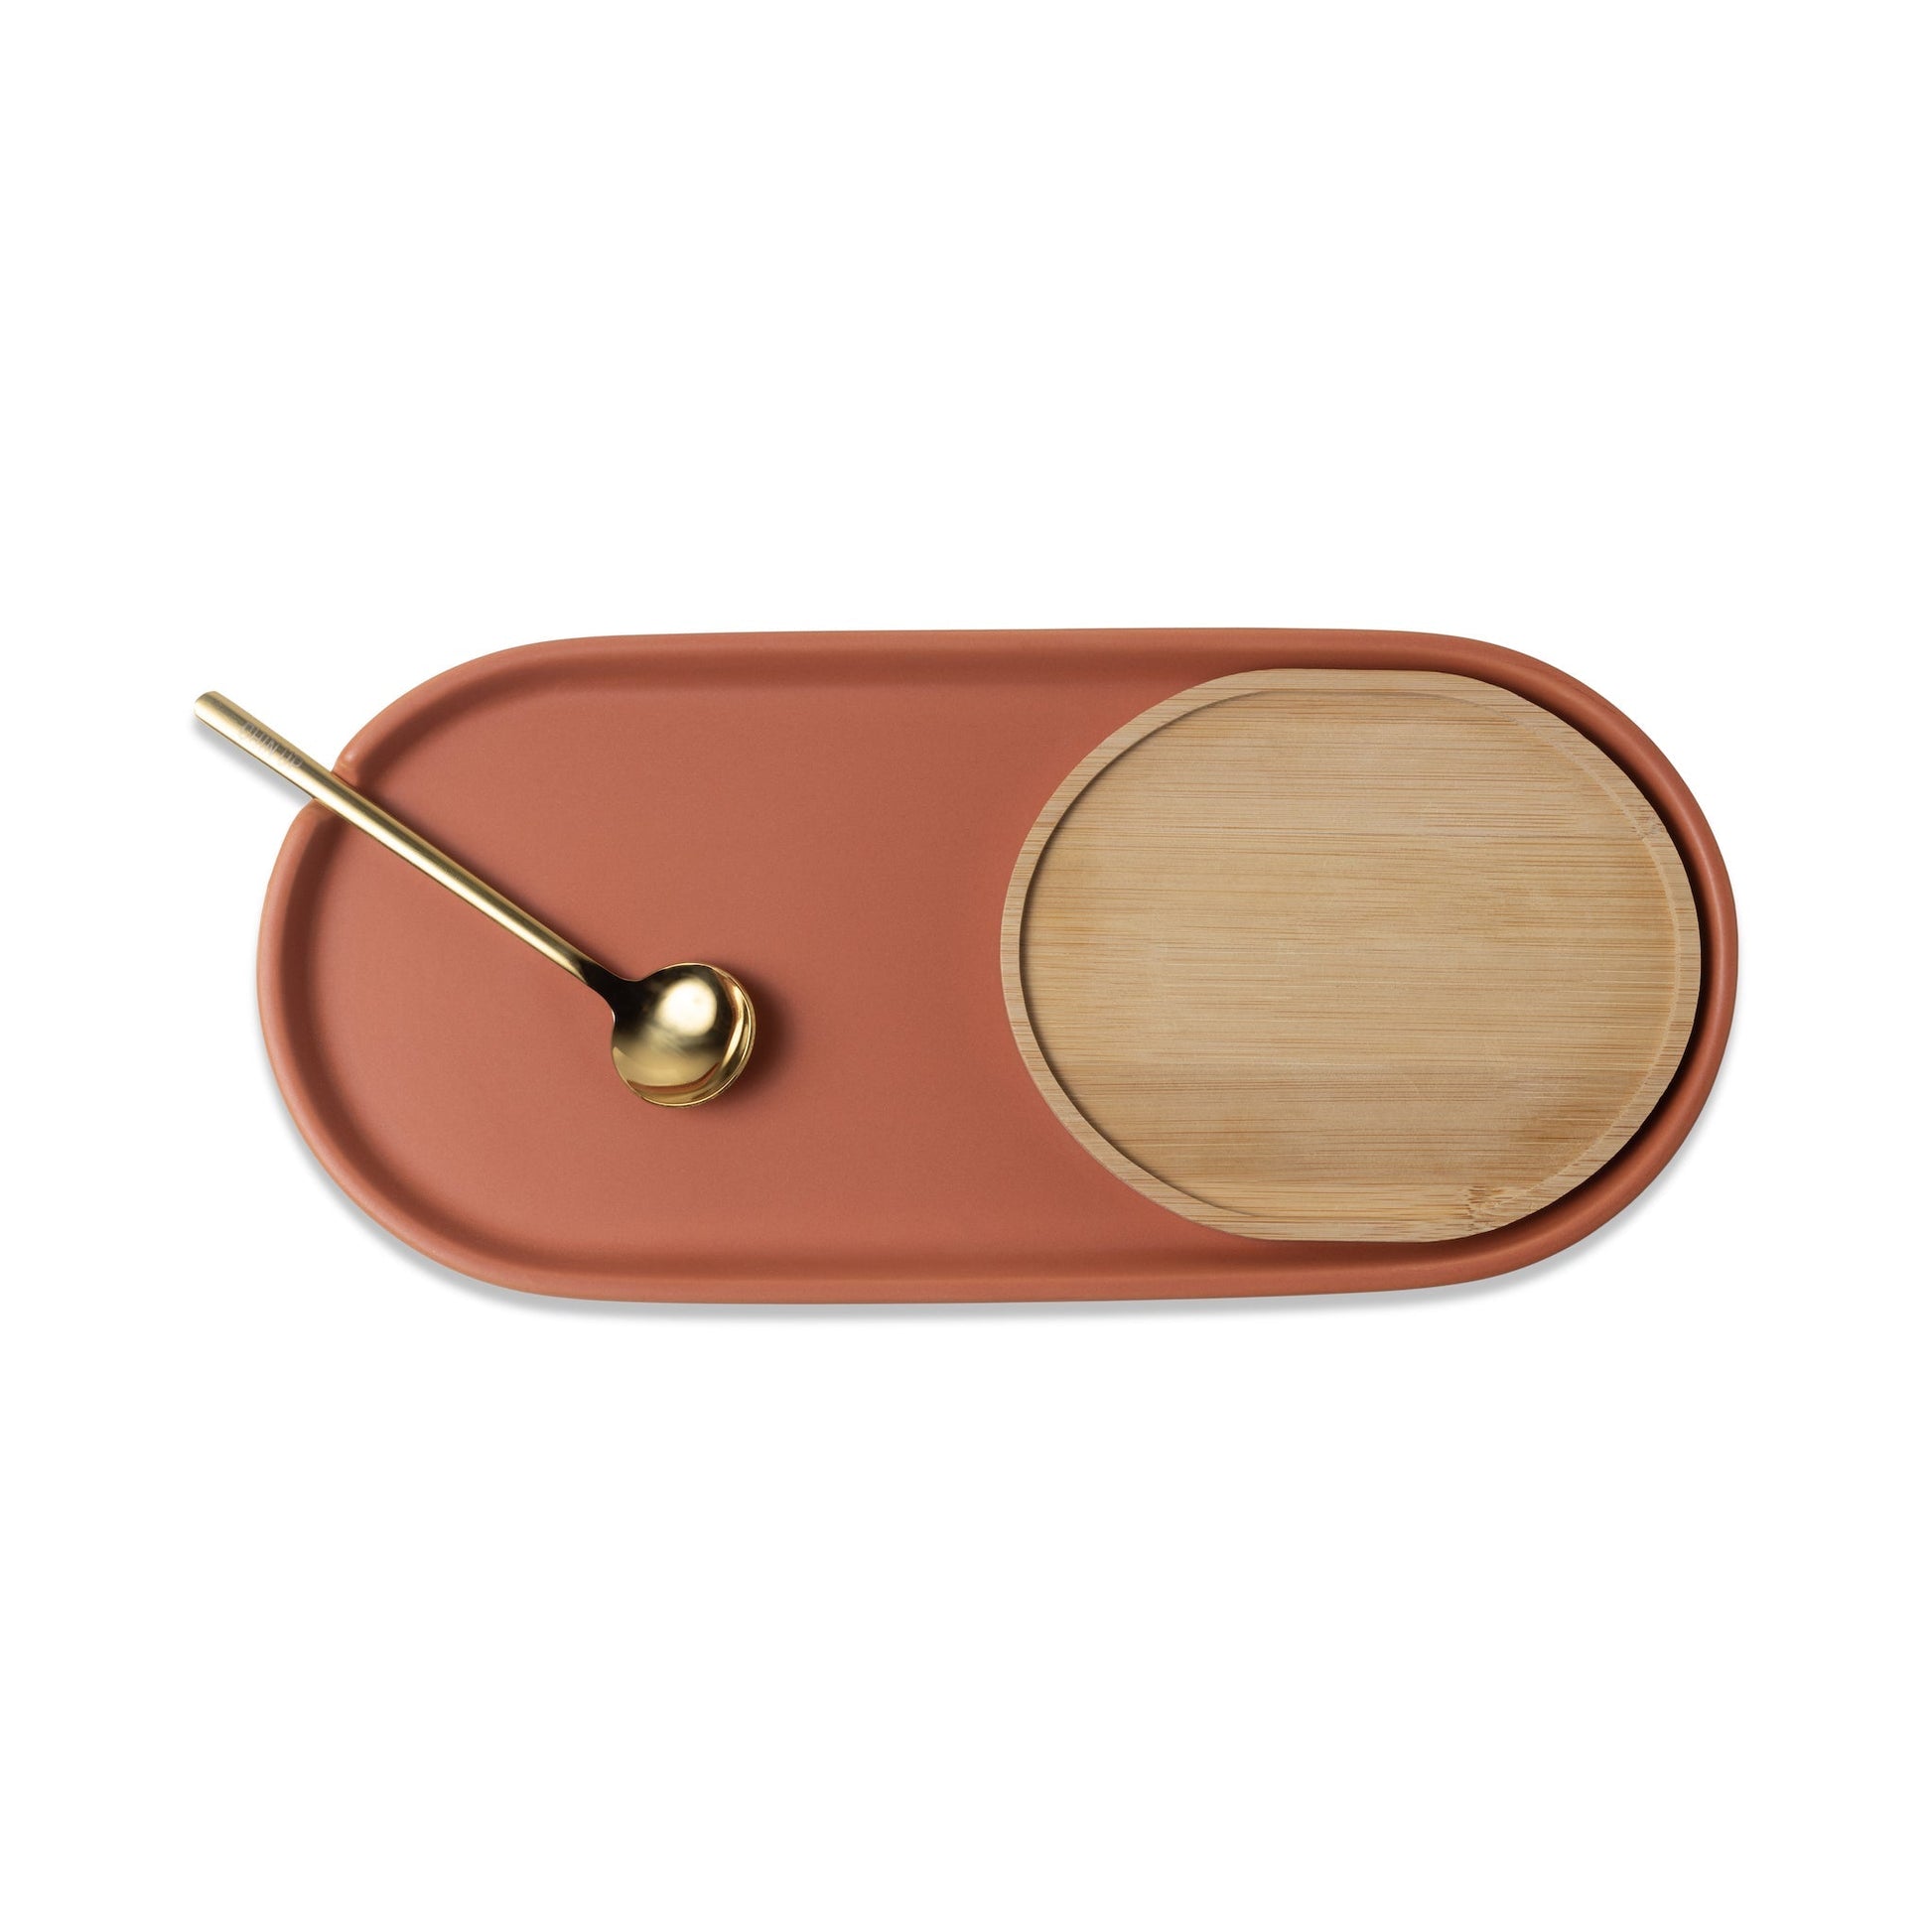 Nesting Tray - Warm ceramic tray with bamboo bowl holder and spoon